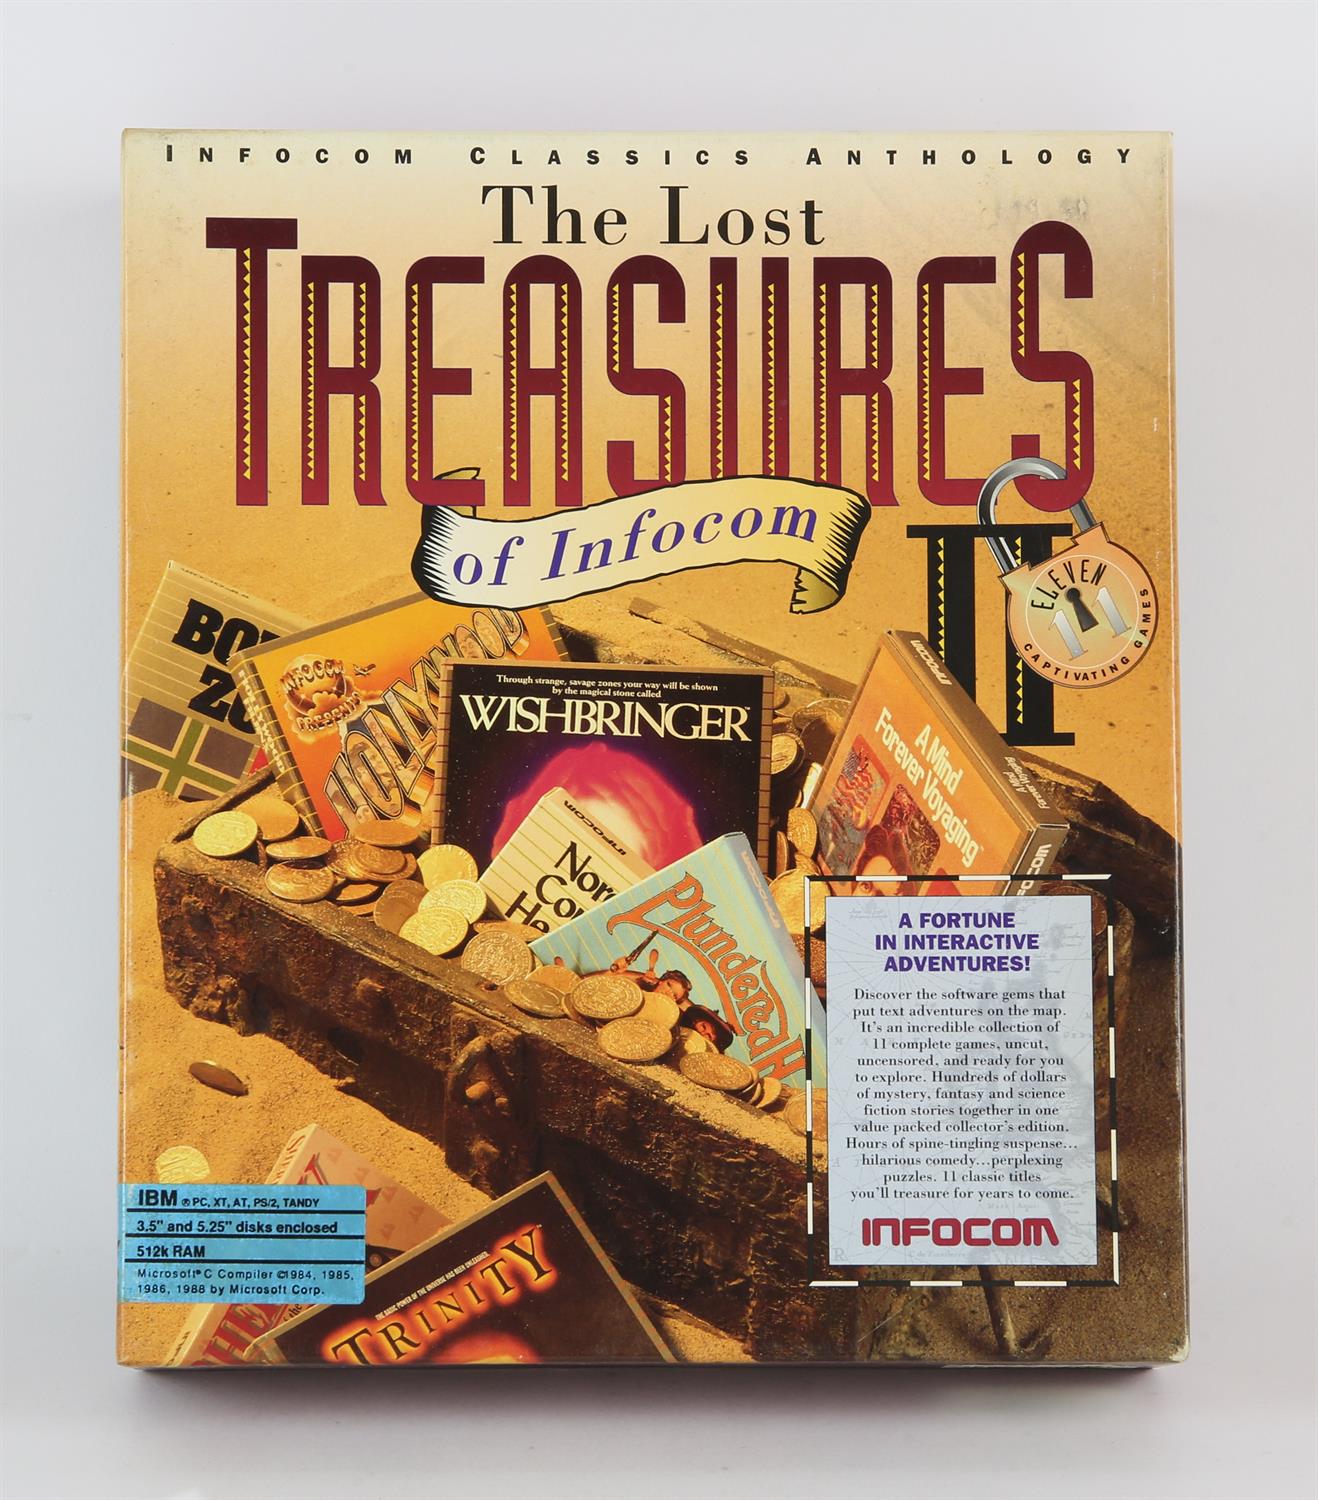 The lost treasures of Infocom II IBM PC game 3.5" and 5.25" disks.